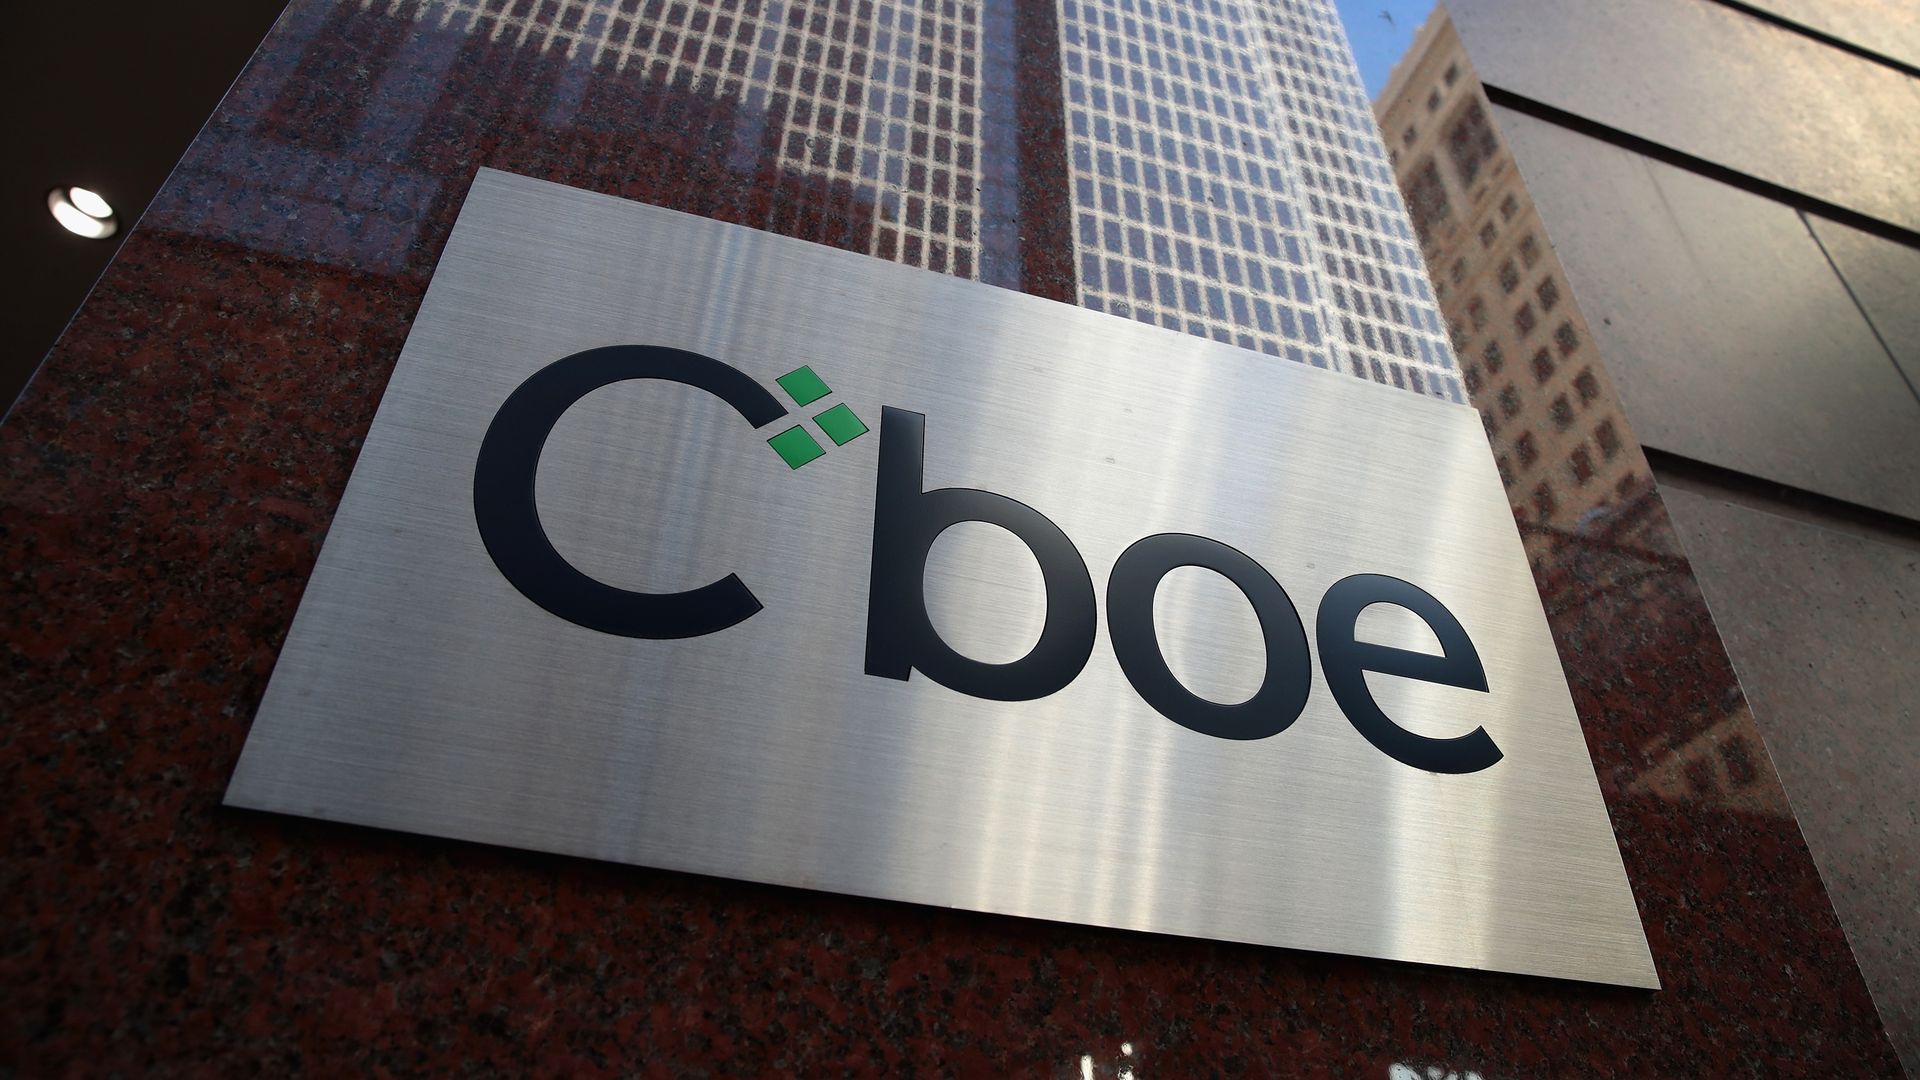 Cboe holdings sign